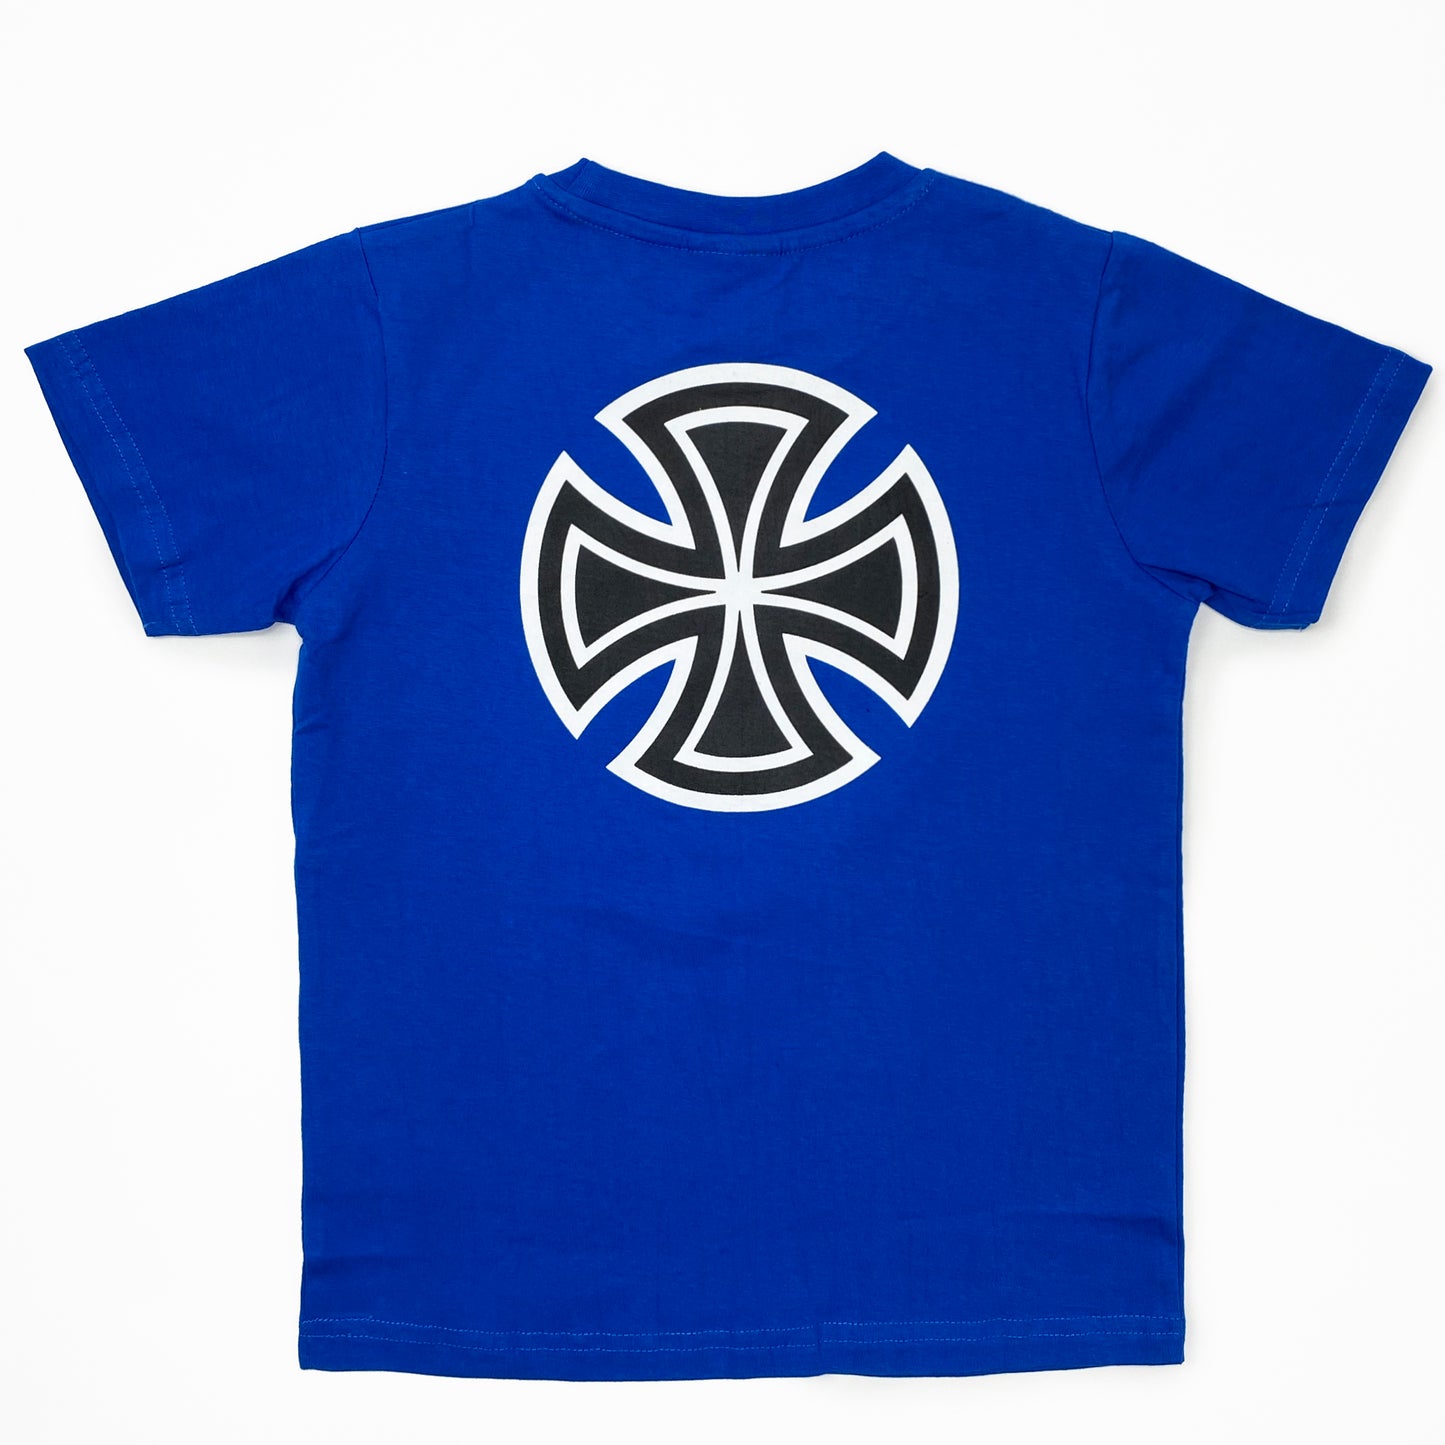 Independent Youth Bar Cross T-Shirt - Royal - Prime Delux Store